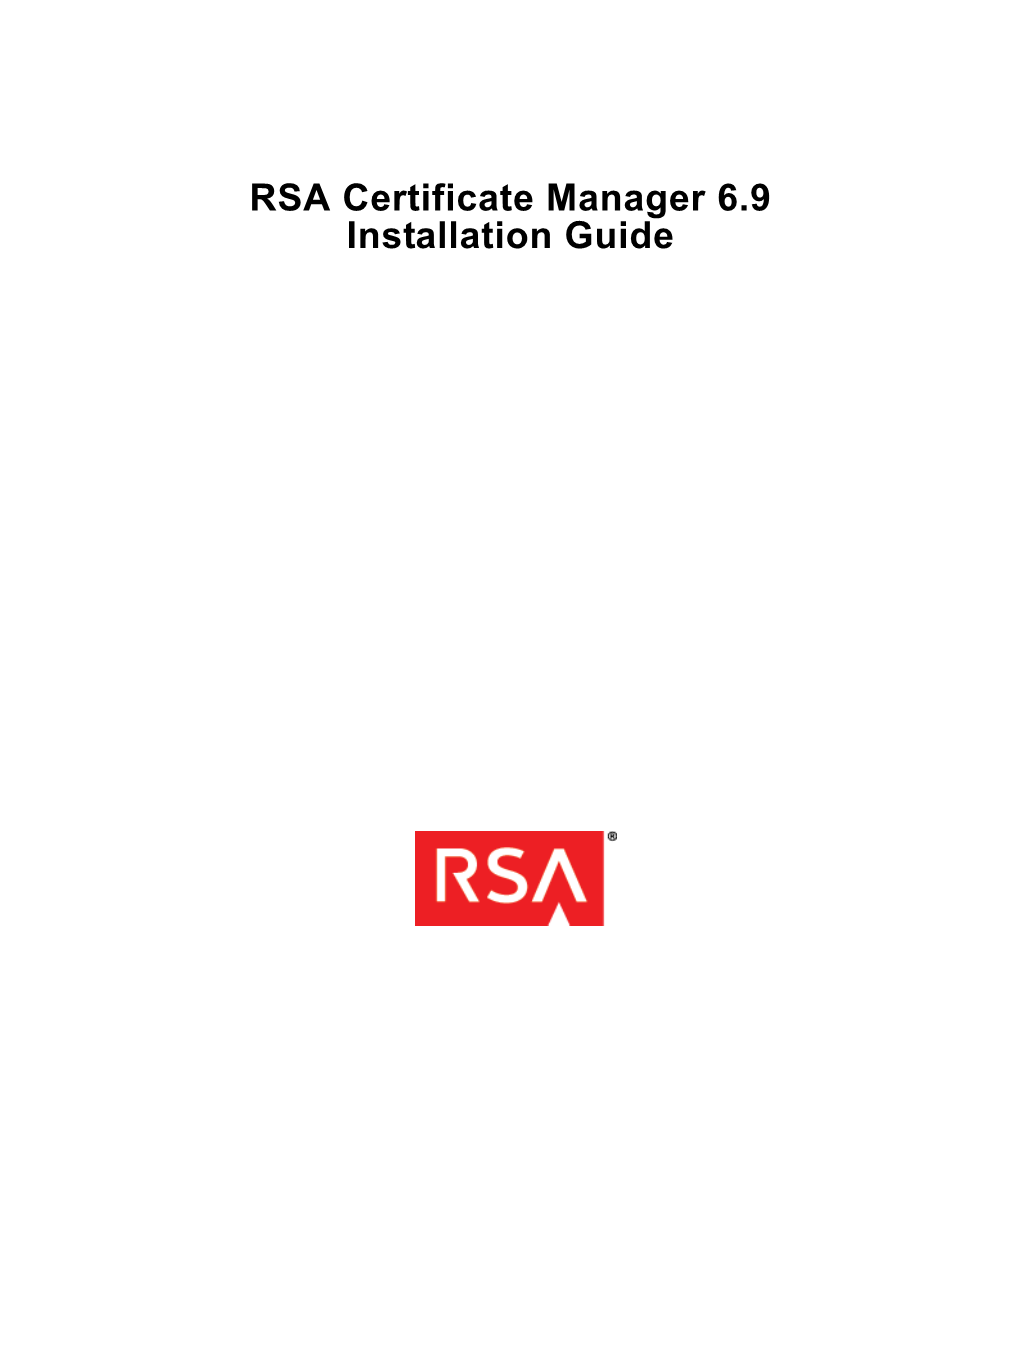 RSA Certificate Manager 6.9 Installation Guide